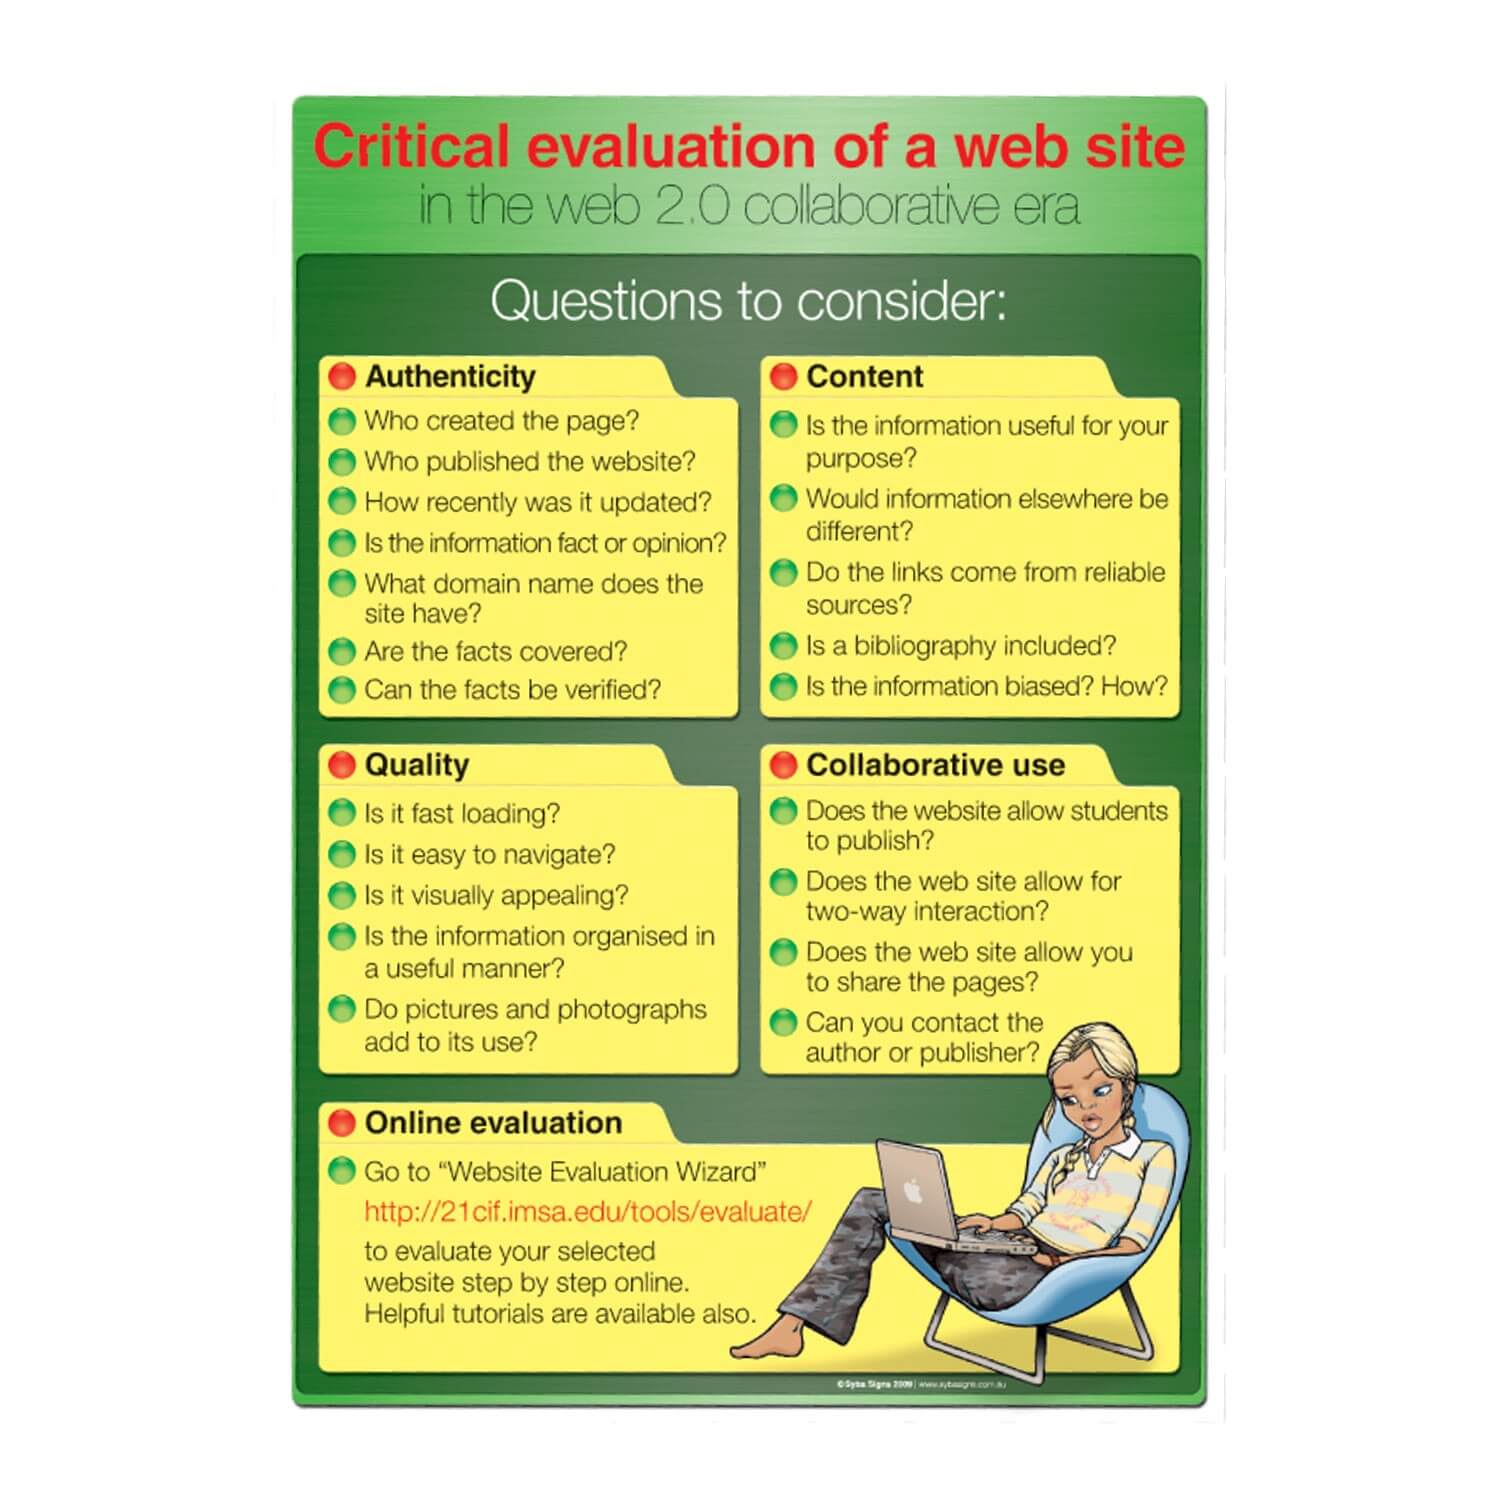 the critical evaluation of websites allows users to identify